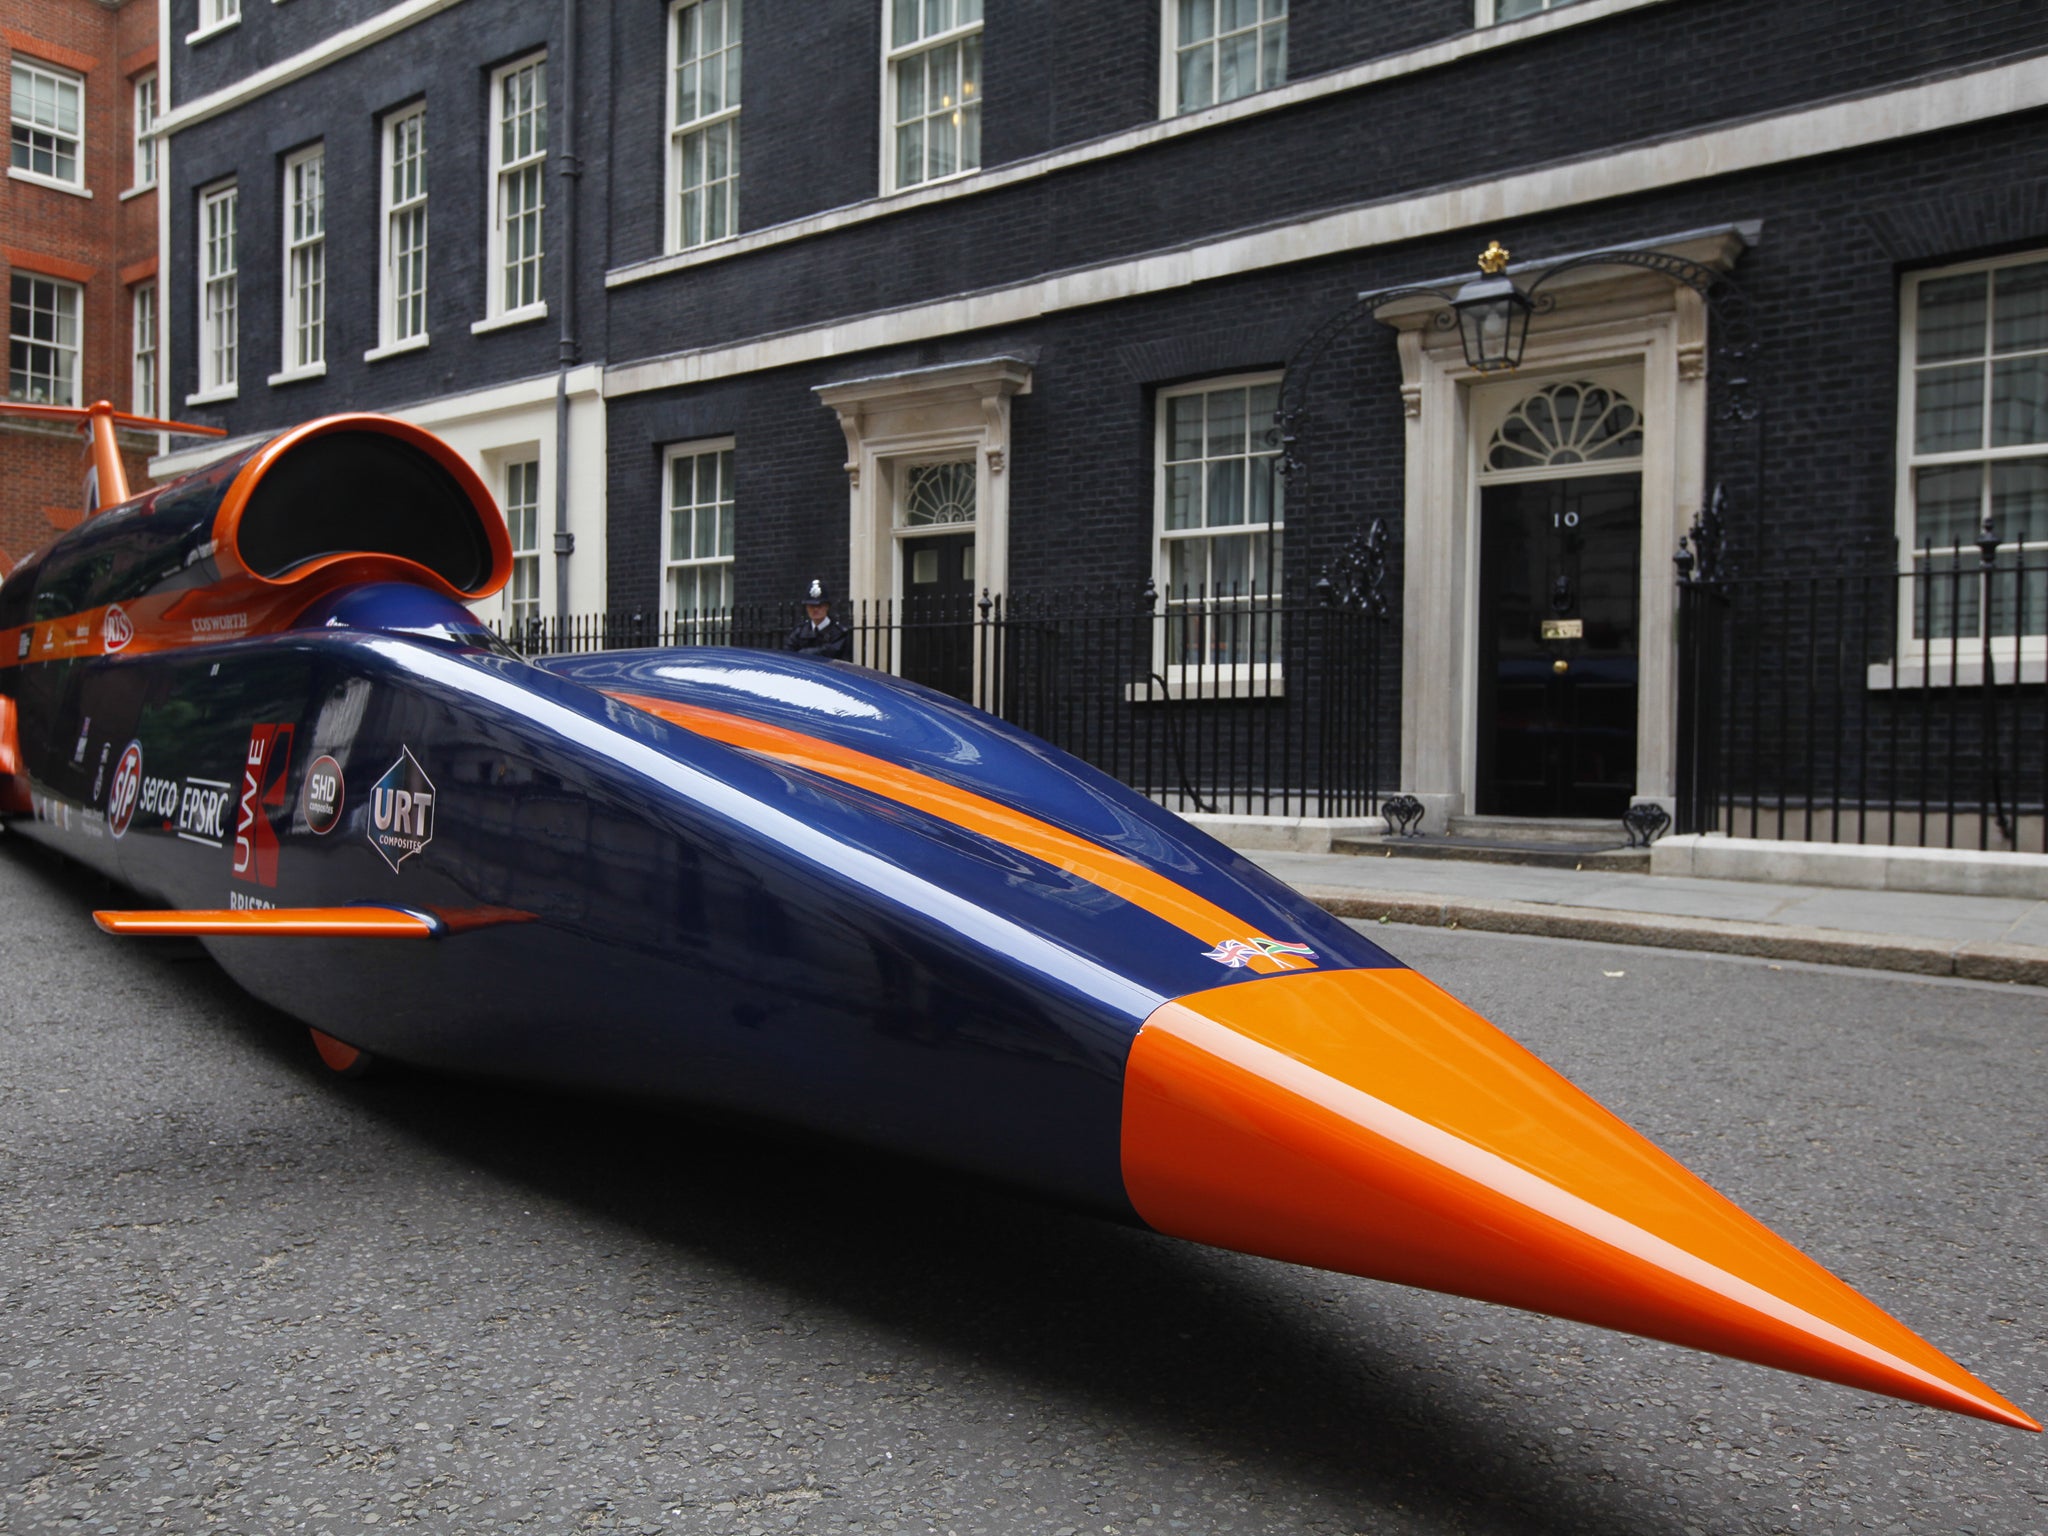 The car is displayed at Downing Street, when the team visited David Cameron to demonstrate the new project